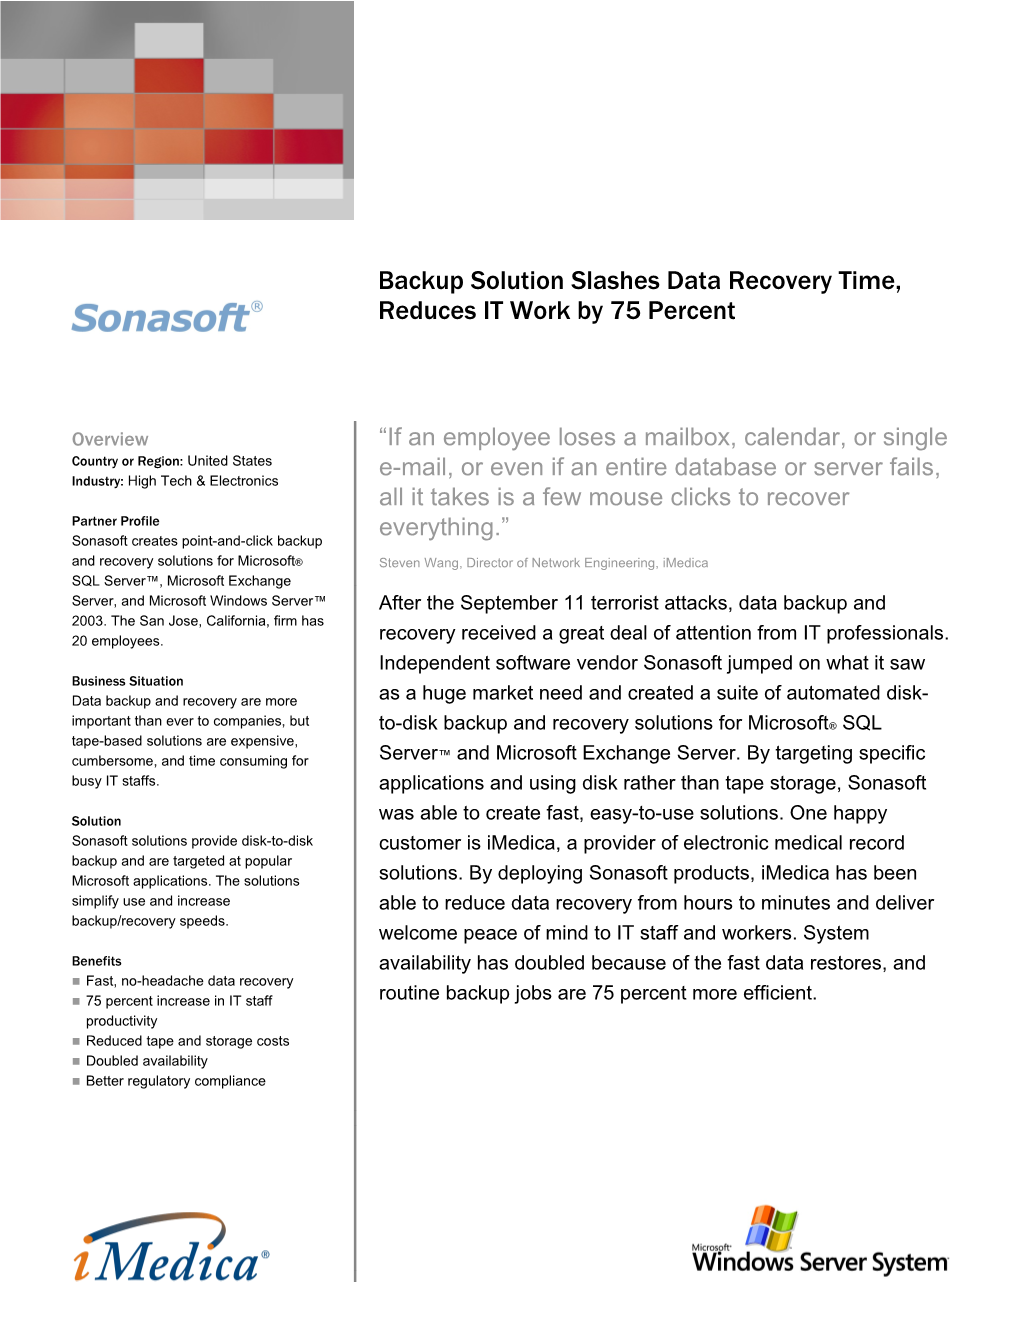 Backup Solution Slashes Data Recovery Time, Reduces IT Work by 75 Percent